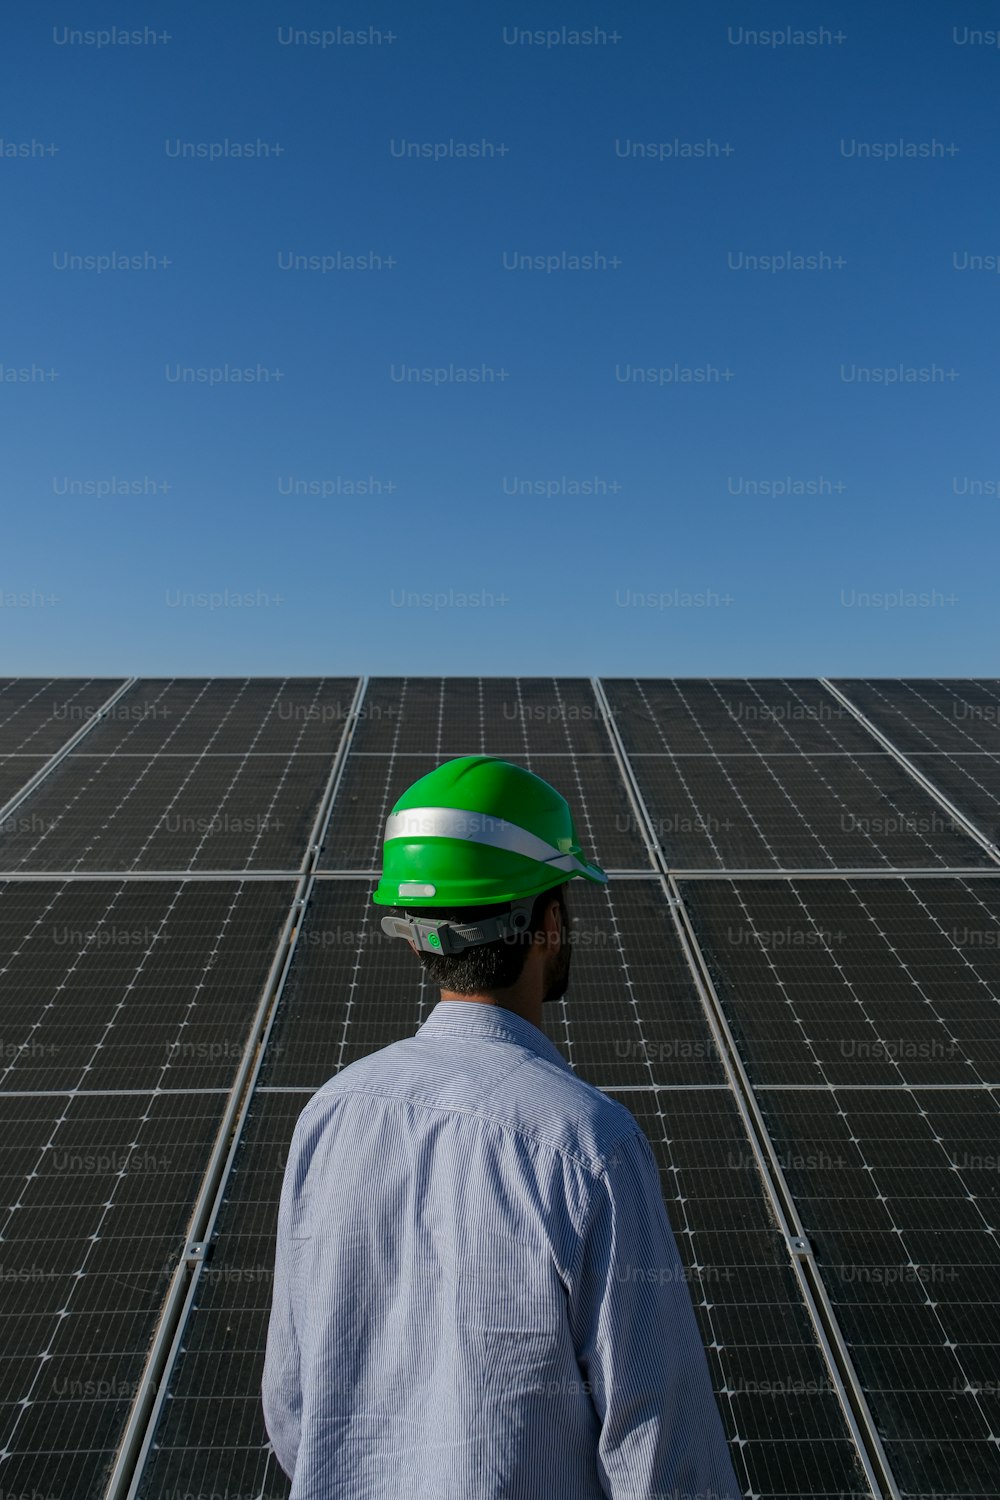 a man wearing a hard hat standing in front of a solar panel